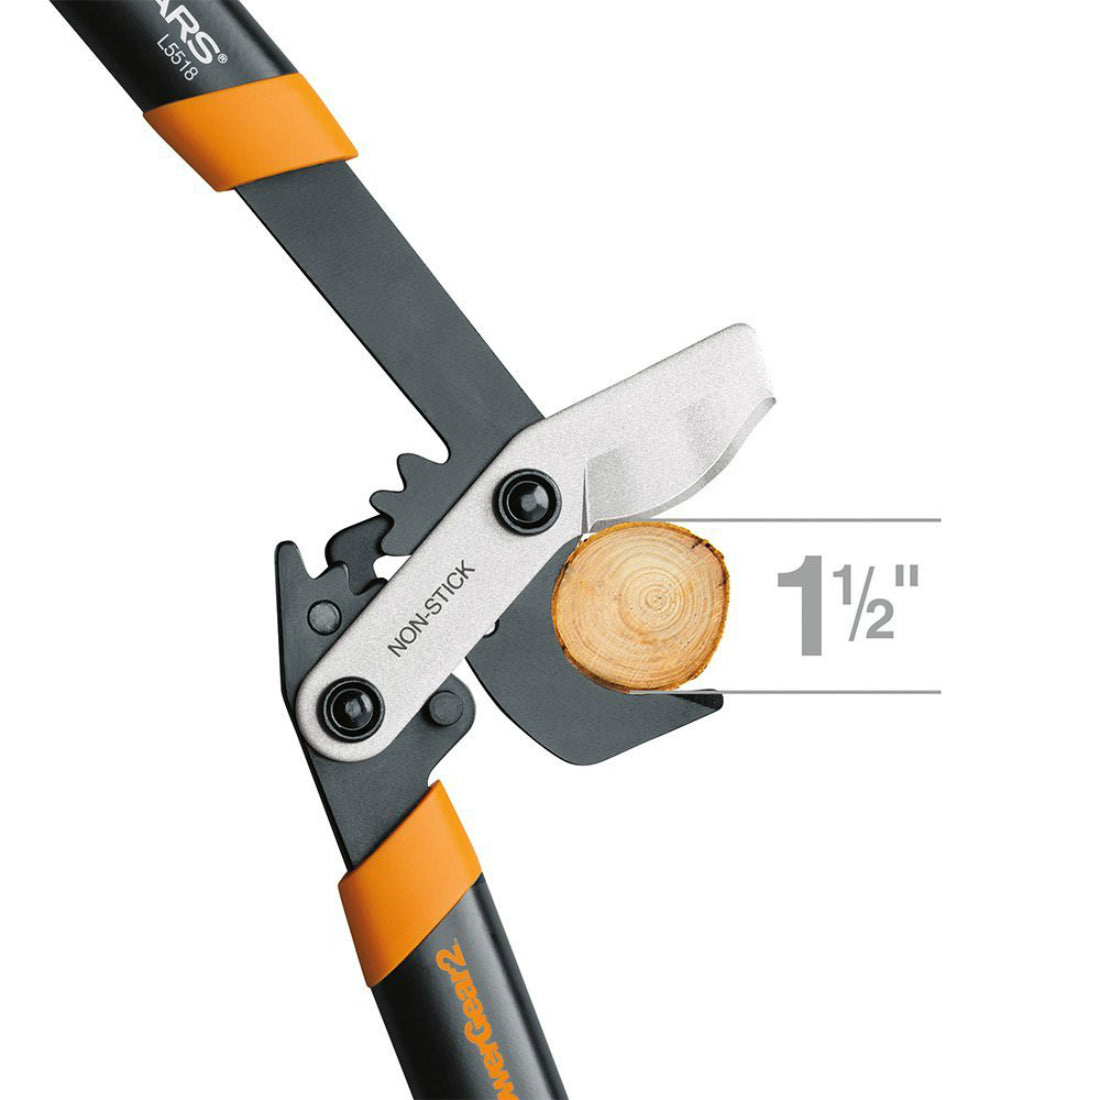 Fiskars 394751-1002 PowerGear2 Bypass Lopper with 1-1/2" Cutting Capacity, 18"